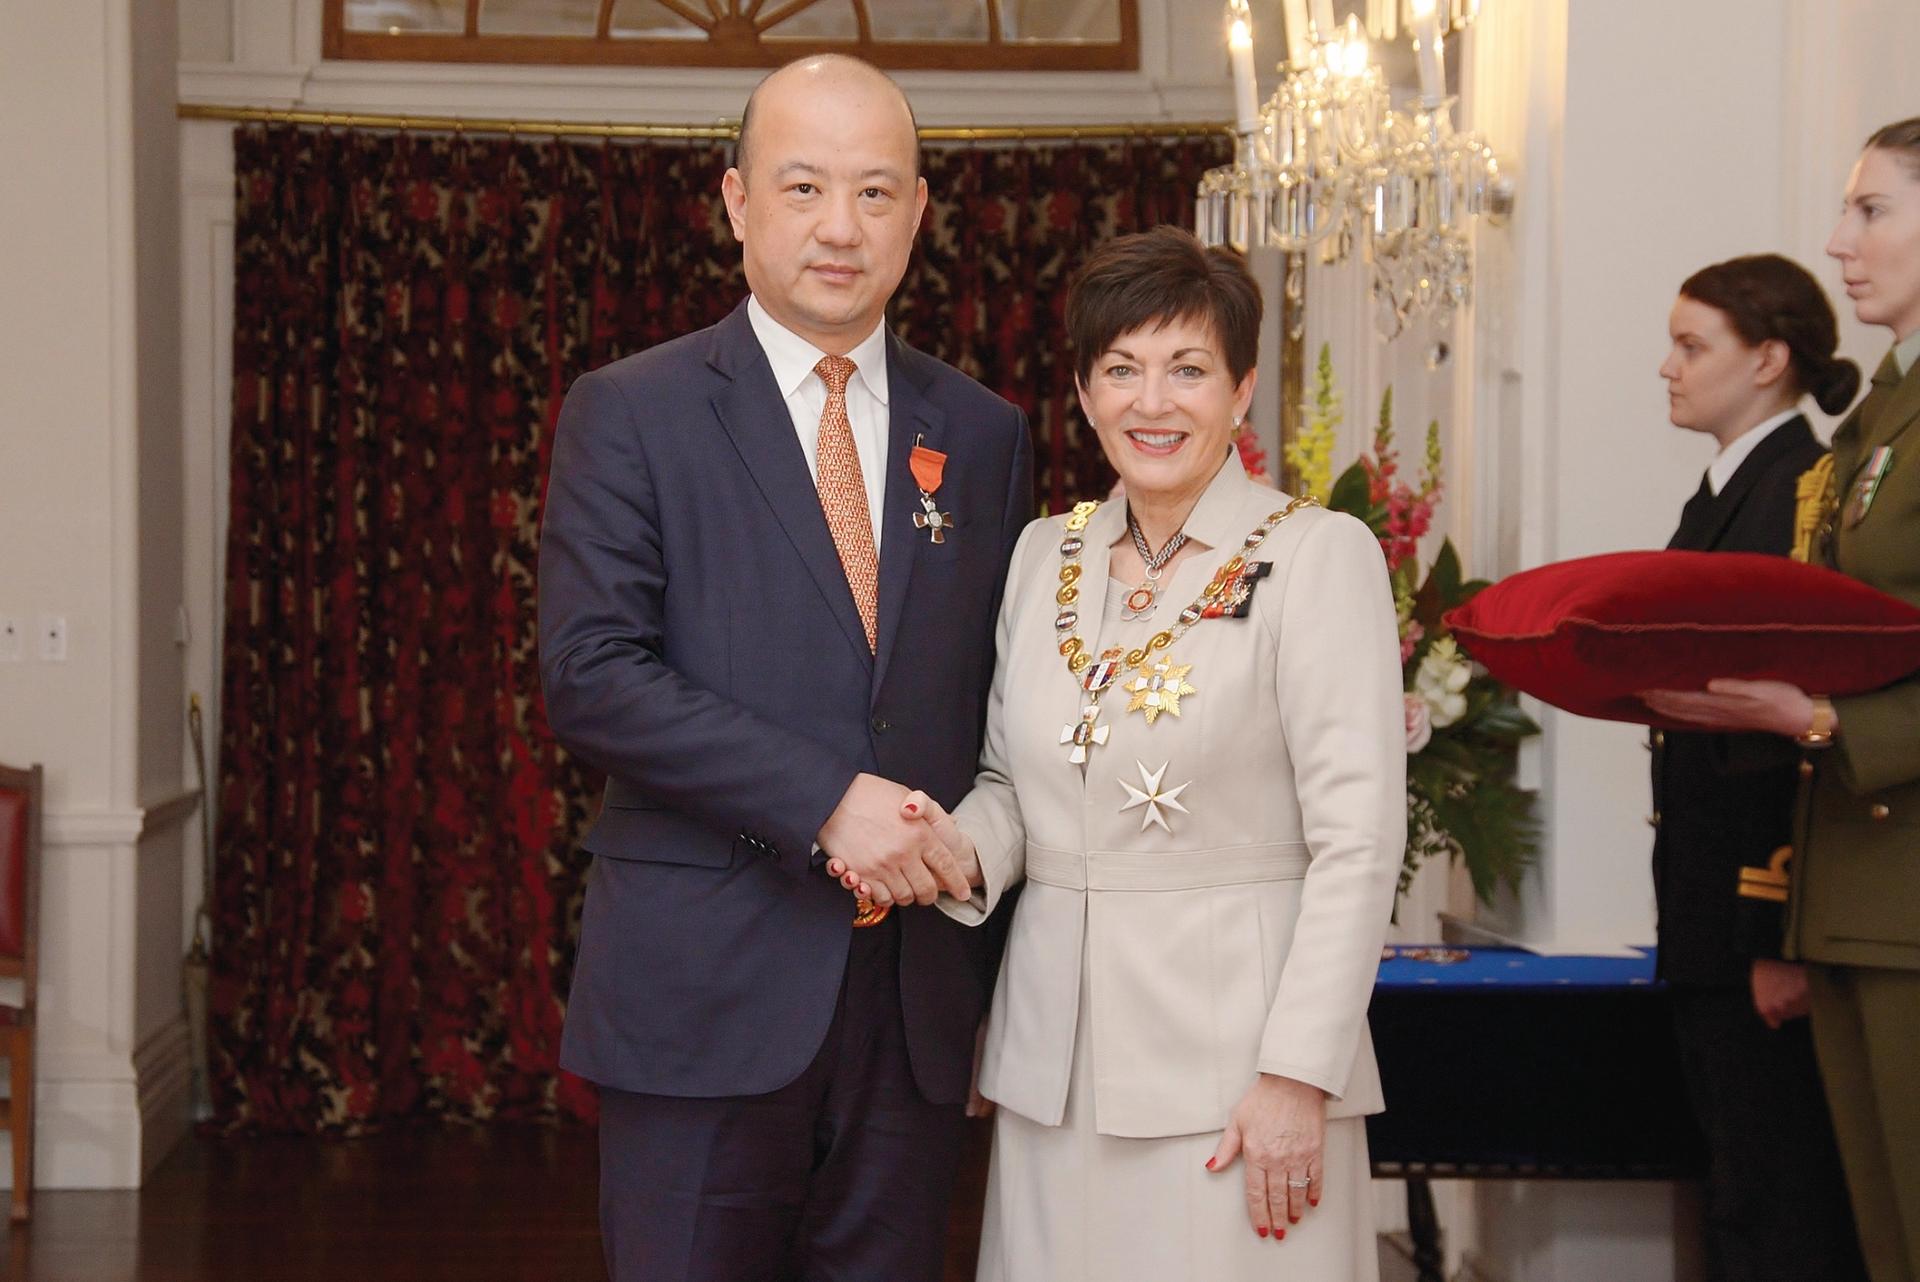 Yikun Zhang, a recipient of New Zealand’s Order of Merit for services to New Zealand-China relations and the Chinese community

Photo: Government House (Creative Commons)